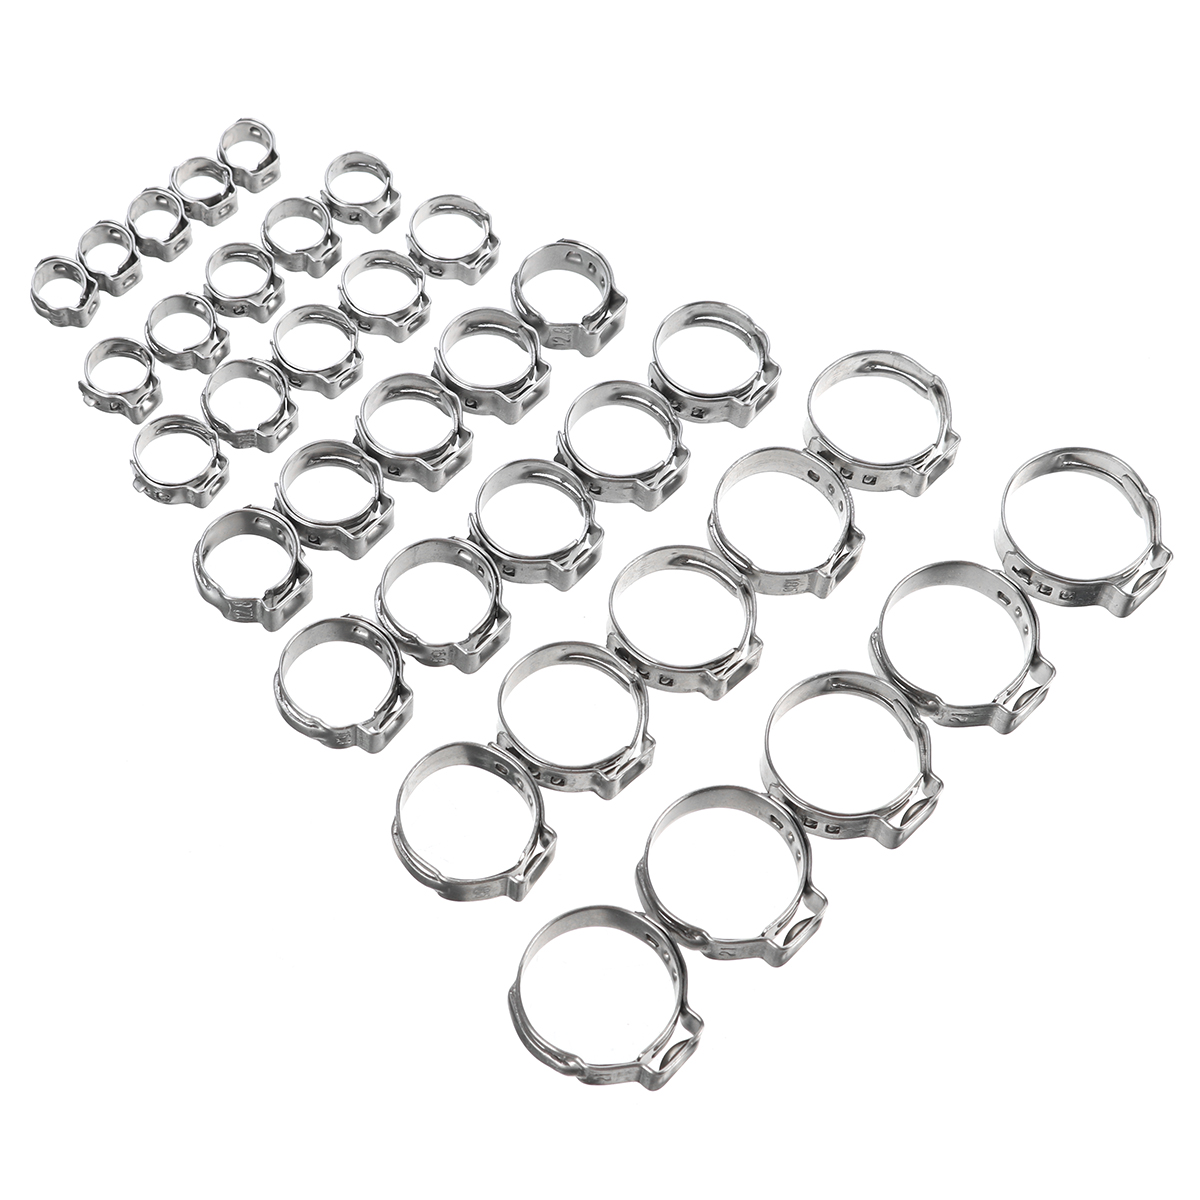 130-Pcs-1-Ear-Hose-Clamps-Stainless-Steel-Assortment-of-Hose-Clamps-Vehicle-Galvanized-1866090-6